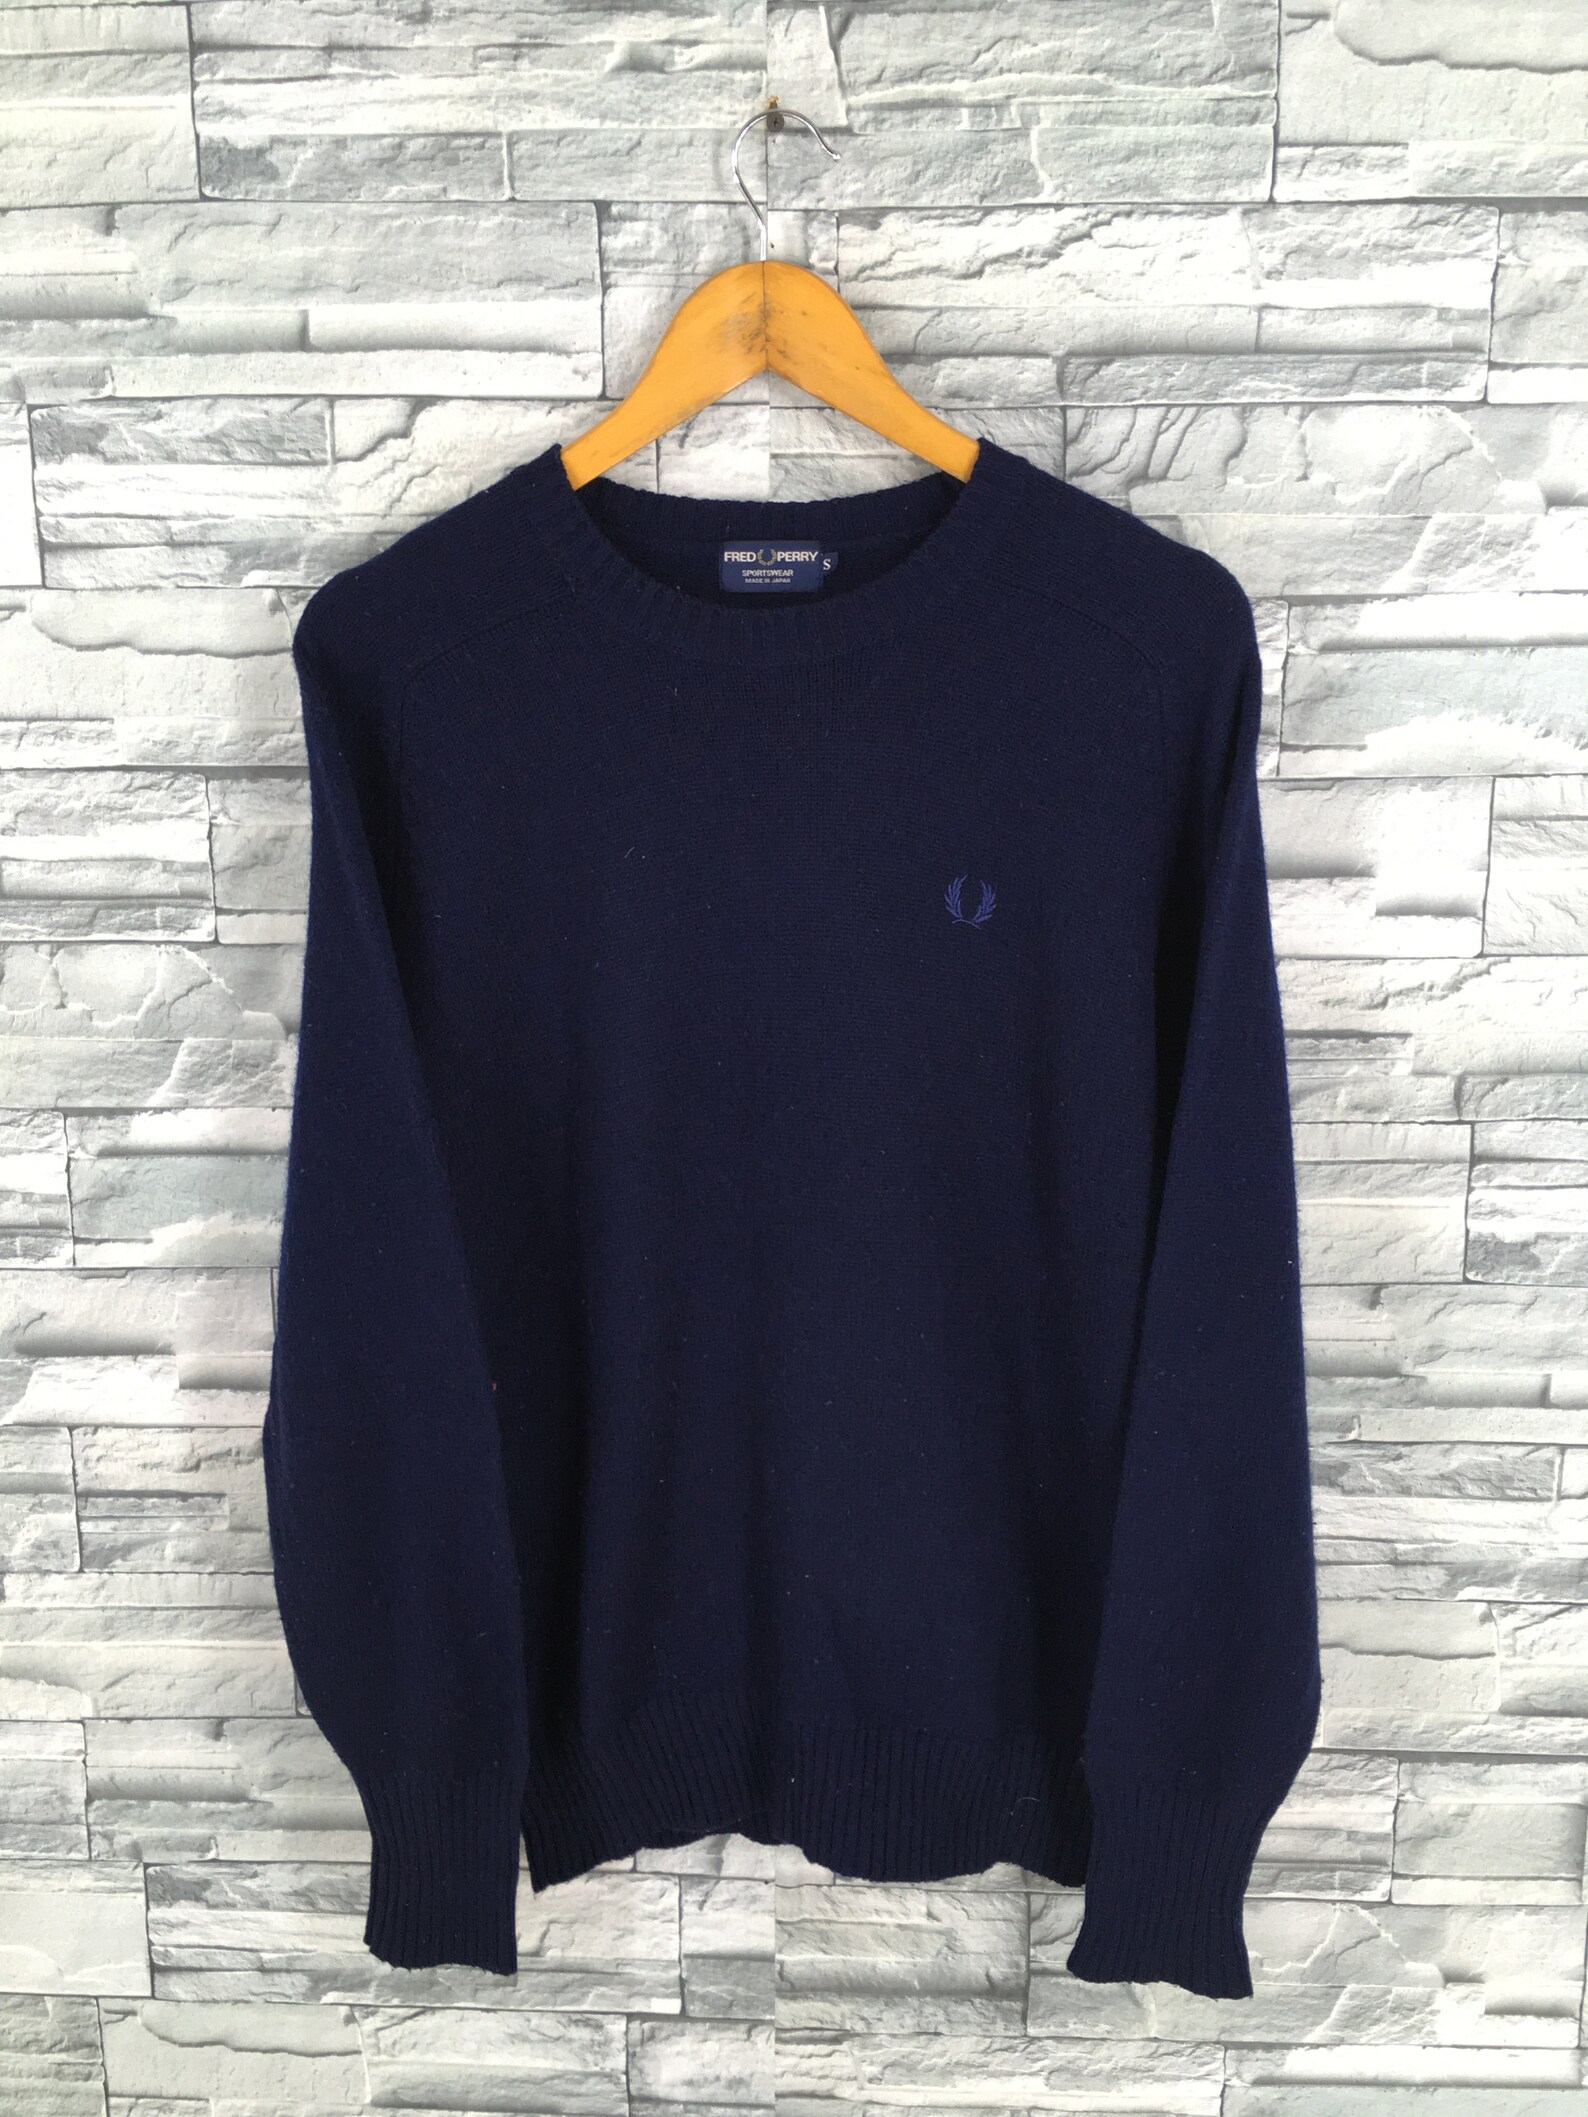 Vintage Fred Perry Sportswear Jumper Blue Small 1990s Fred | Etsy